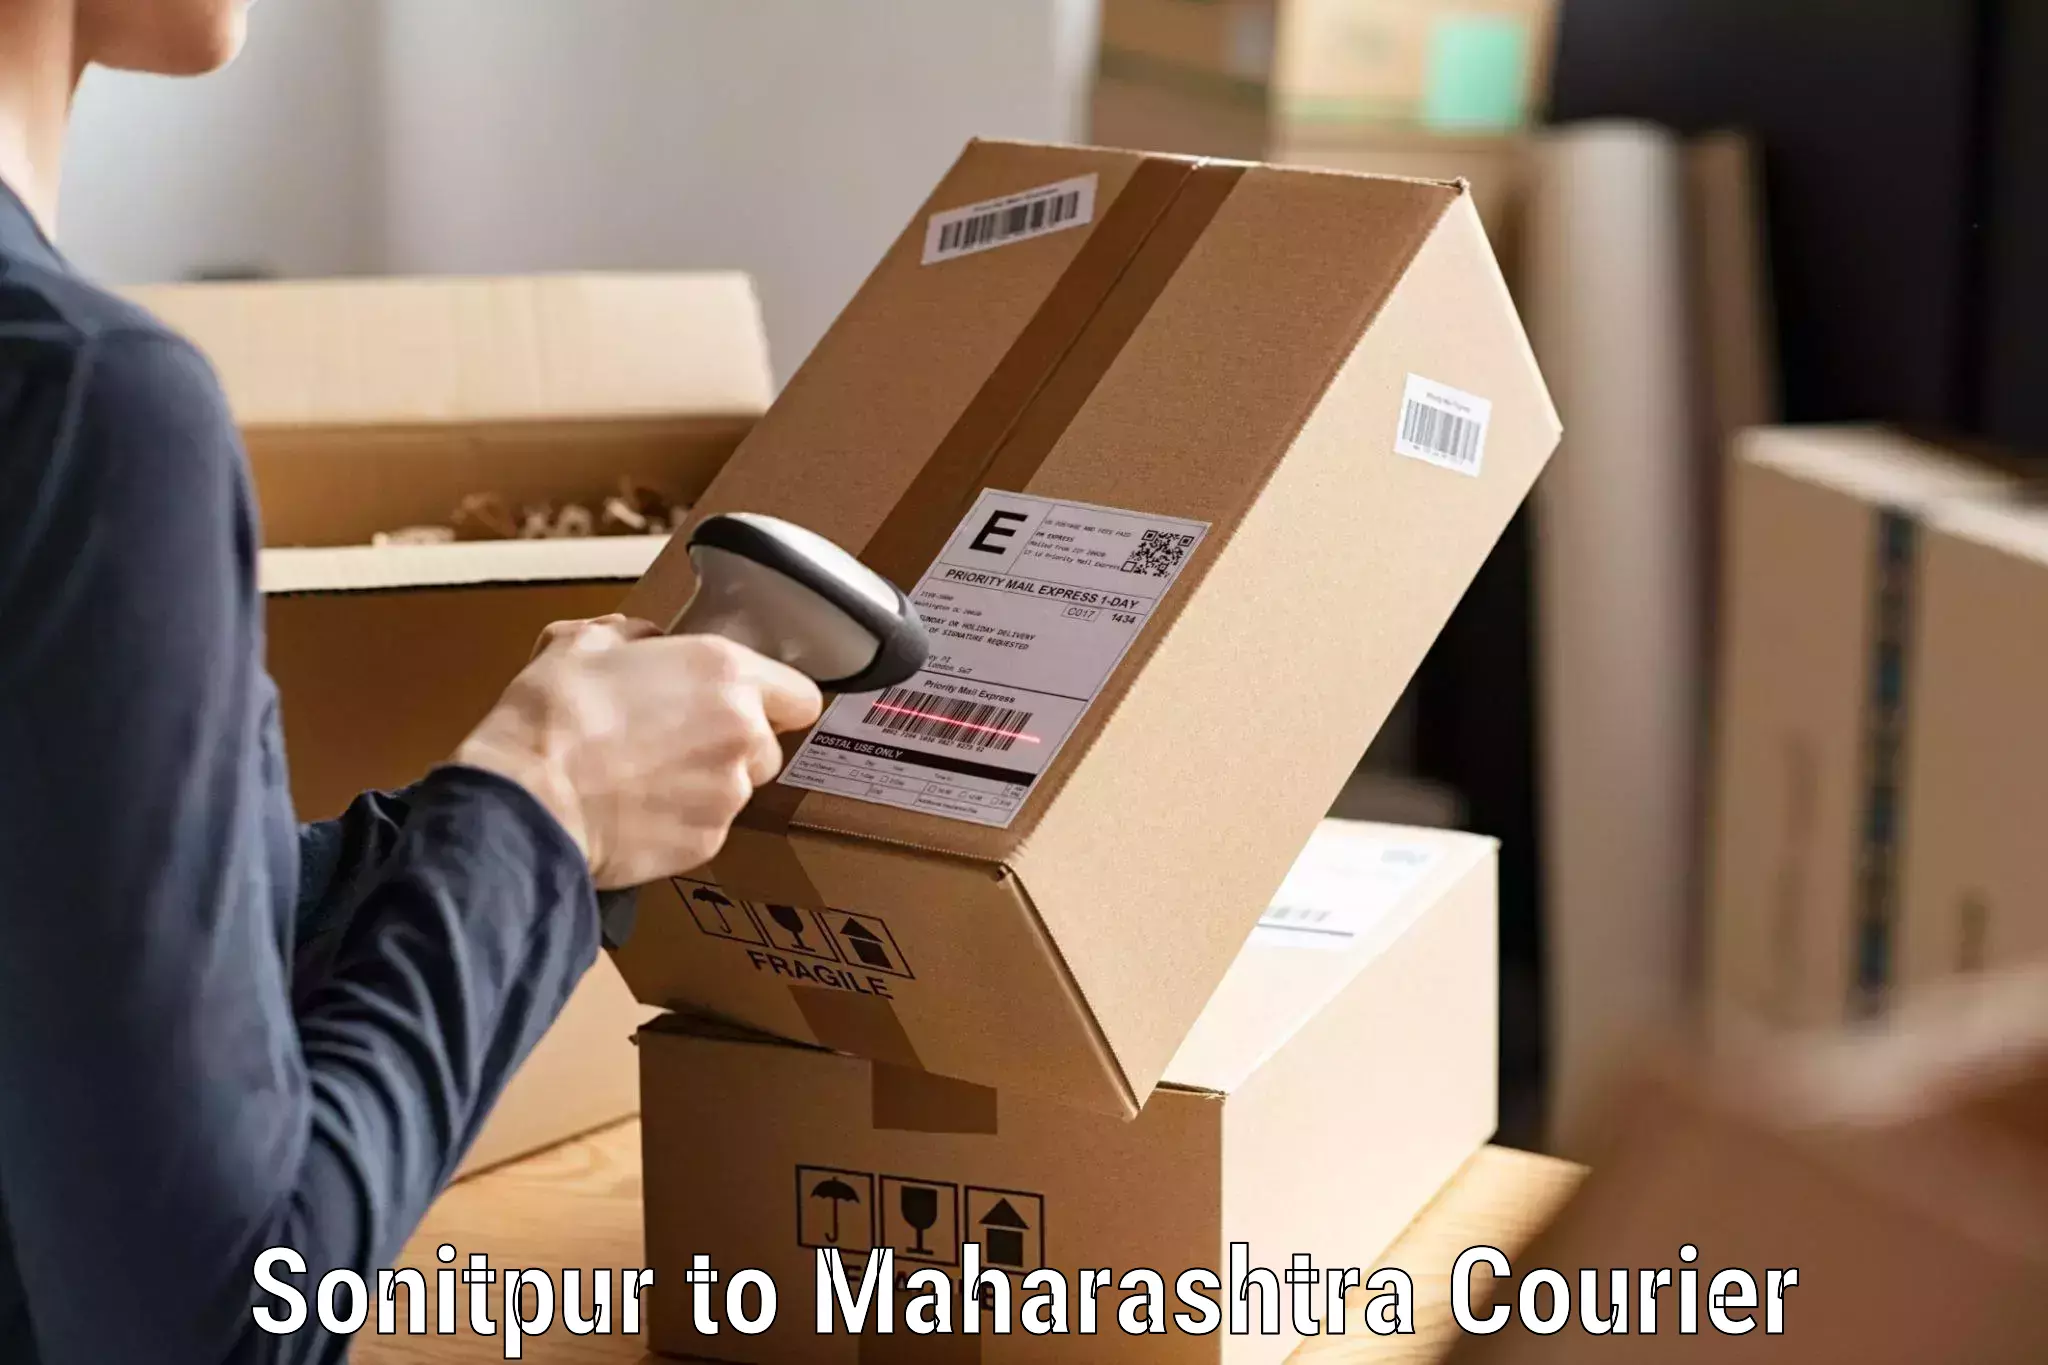 Courier app Sonitpur to Baramati